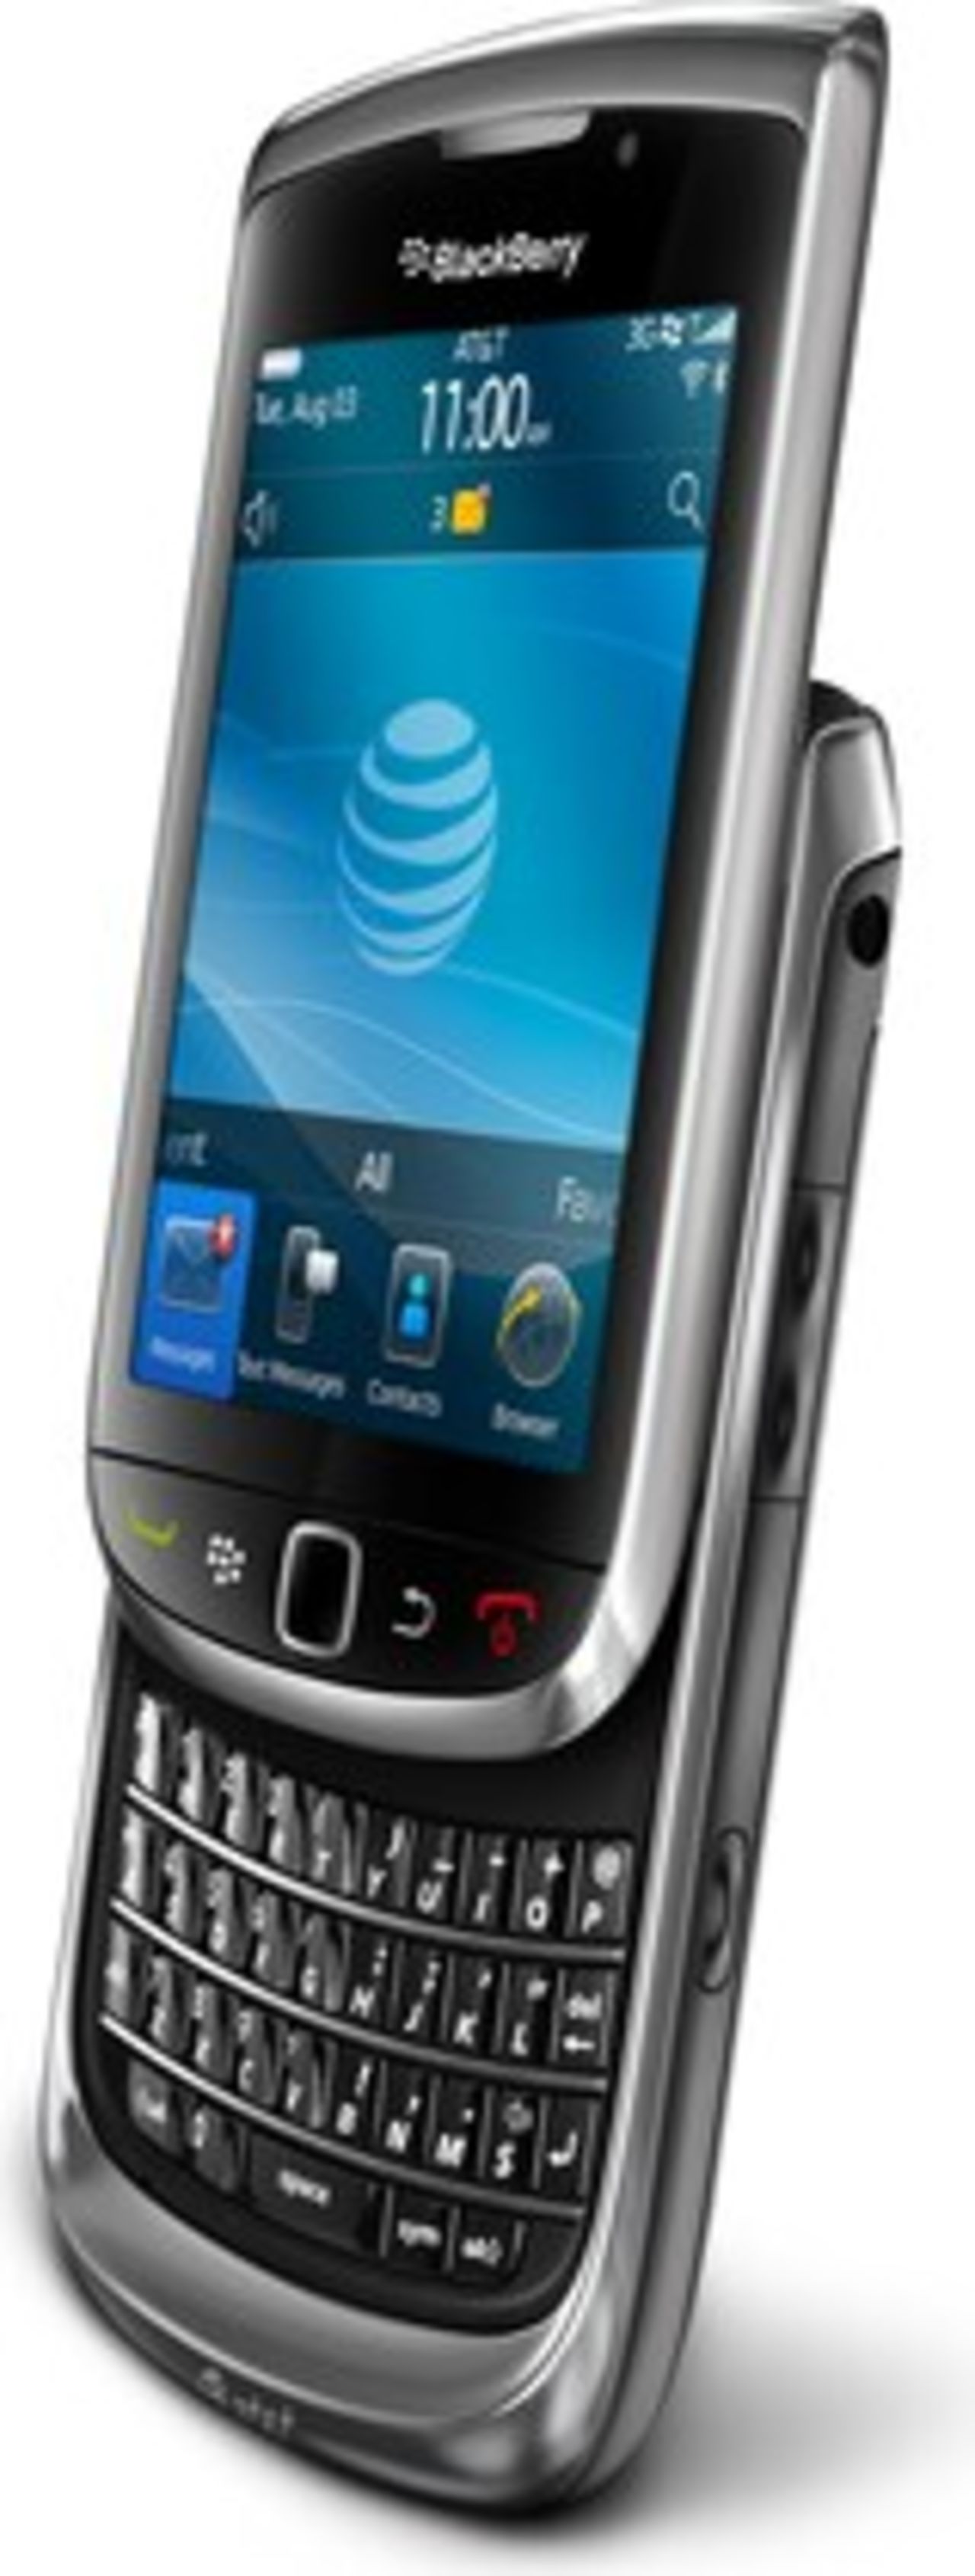 Introduced in 2010, the first Torch had a touchscreen and full slide-out keyboard, making it a hybrid between the iPhone and the older BlackBerry models. Users weren't impressed, and the phone failed to make much of a splash. 